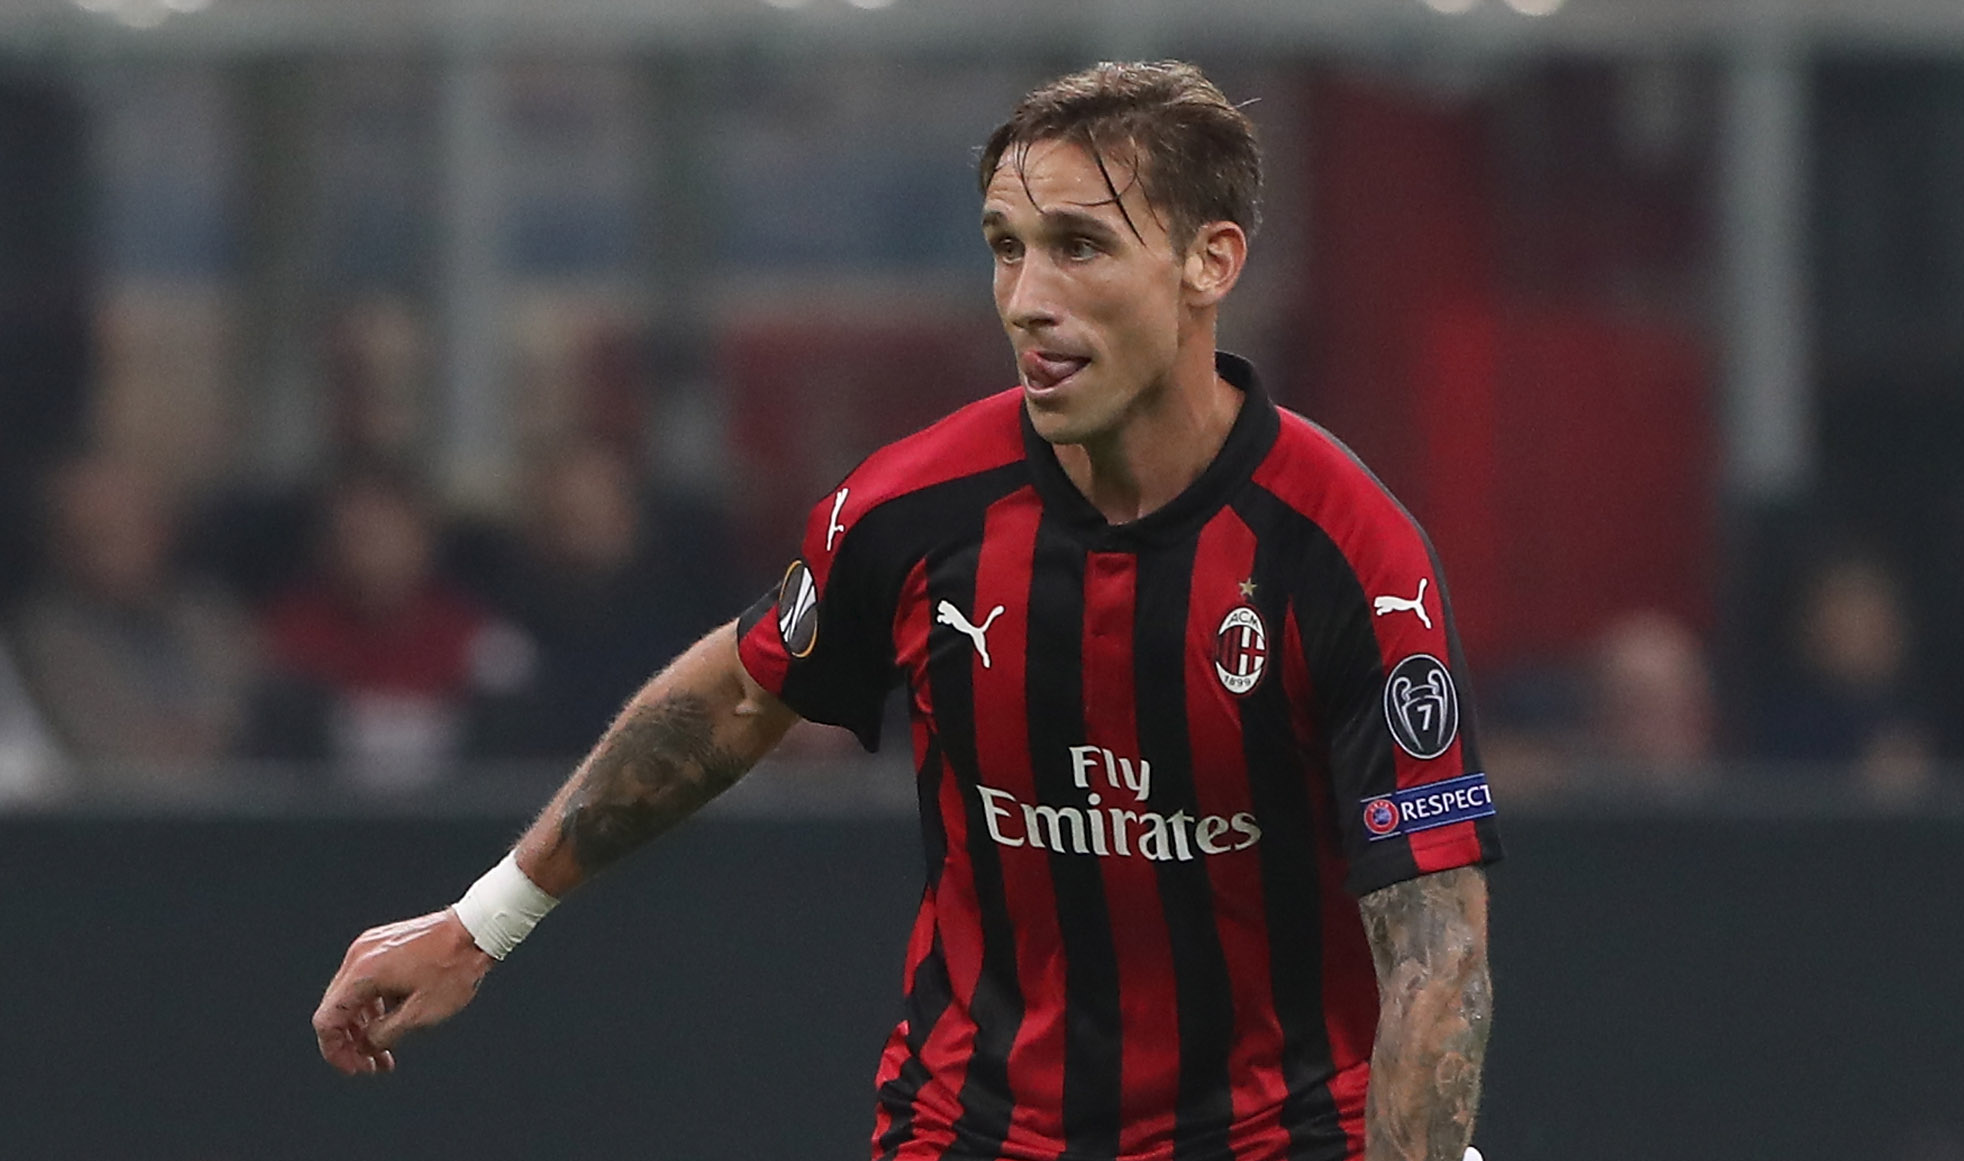 Biglia during the UEFA Europa League Group F match between AC Milan and Real Betis at Stadio Giuseppe Meazza on October 25, 2018 in Milan, Italy.